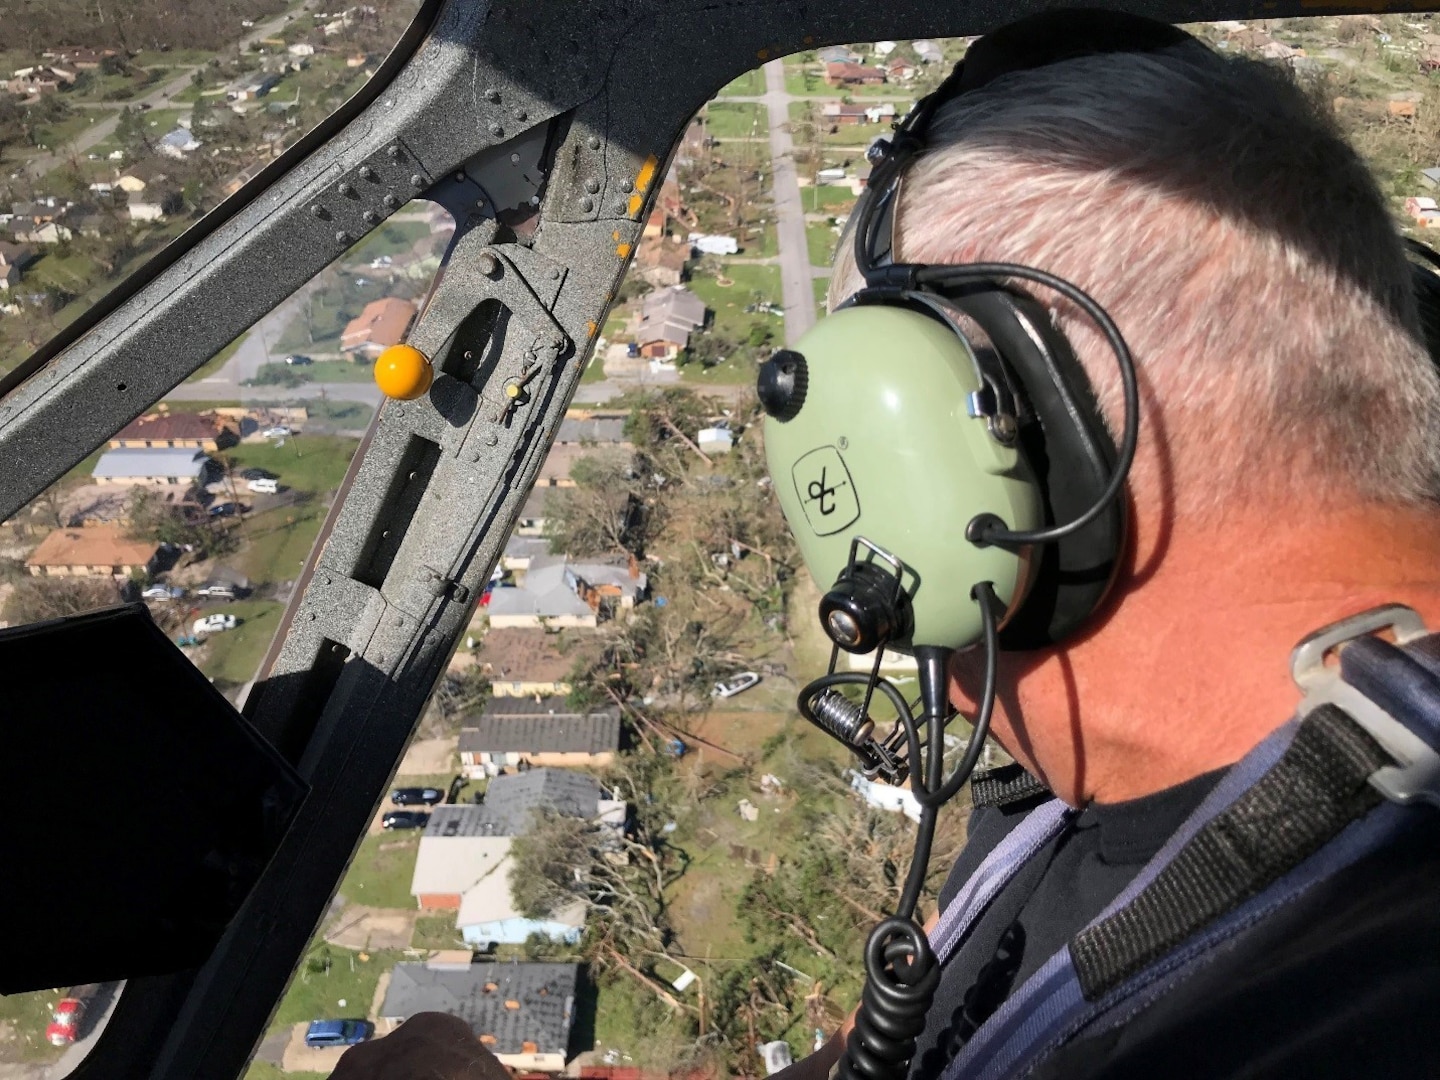 Bay County Sheriff’s Office Chief Pilot Larry Kennedy overlooks the damage caused by Hurricane Michael while conducting air surveillance with the Florida National Guard. Kennedy was accompanied by Guard members to assess the damage and to find the places that need the most support.